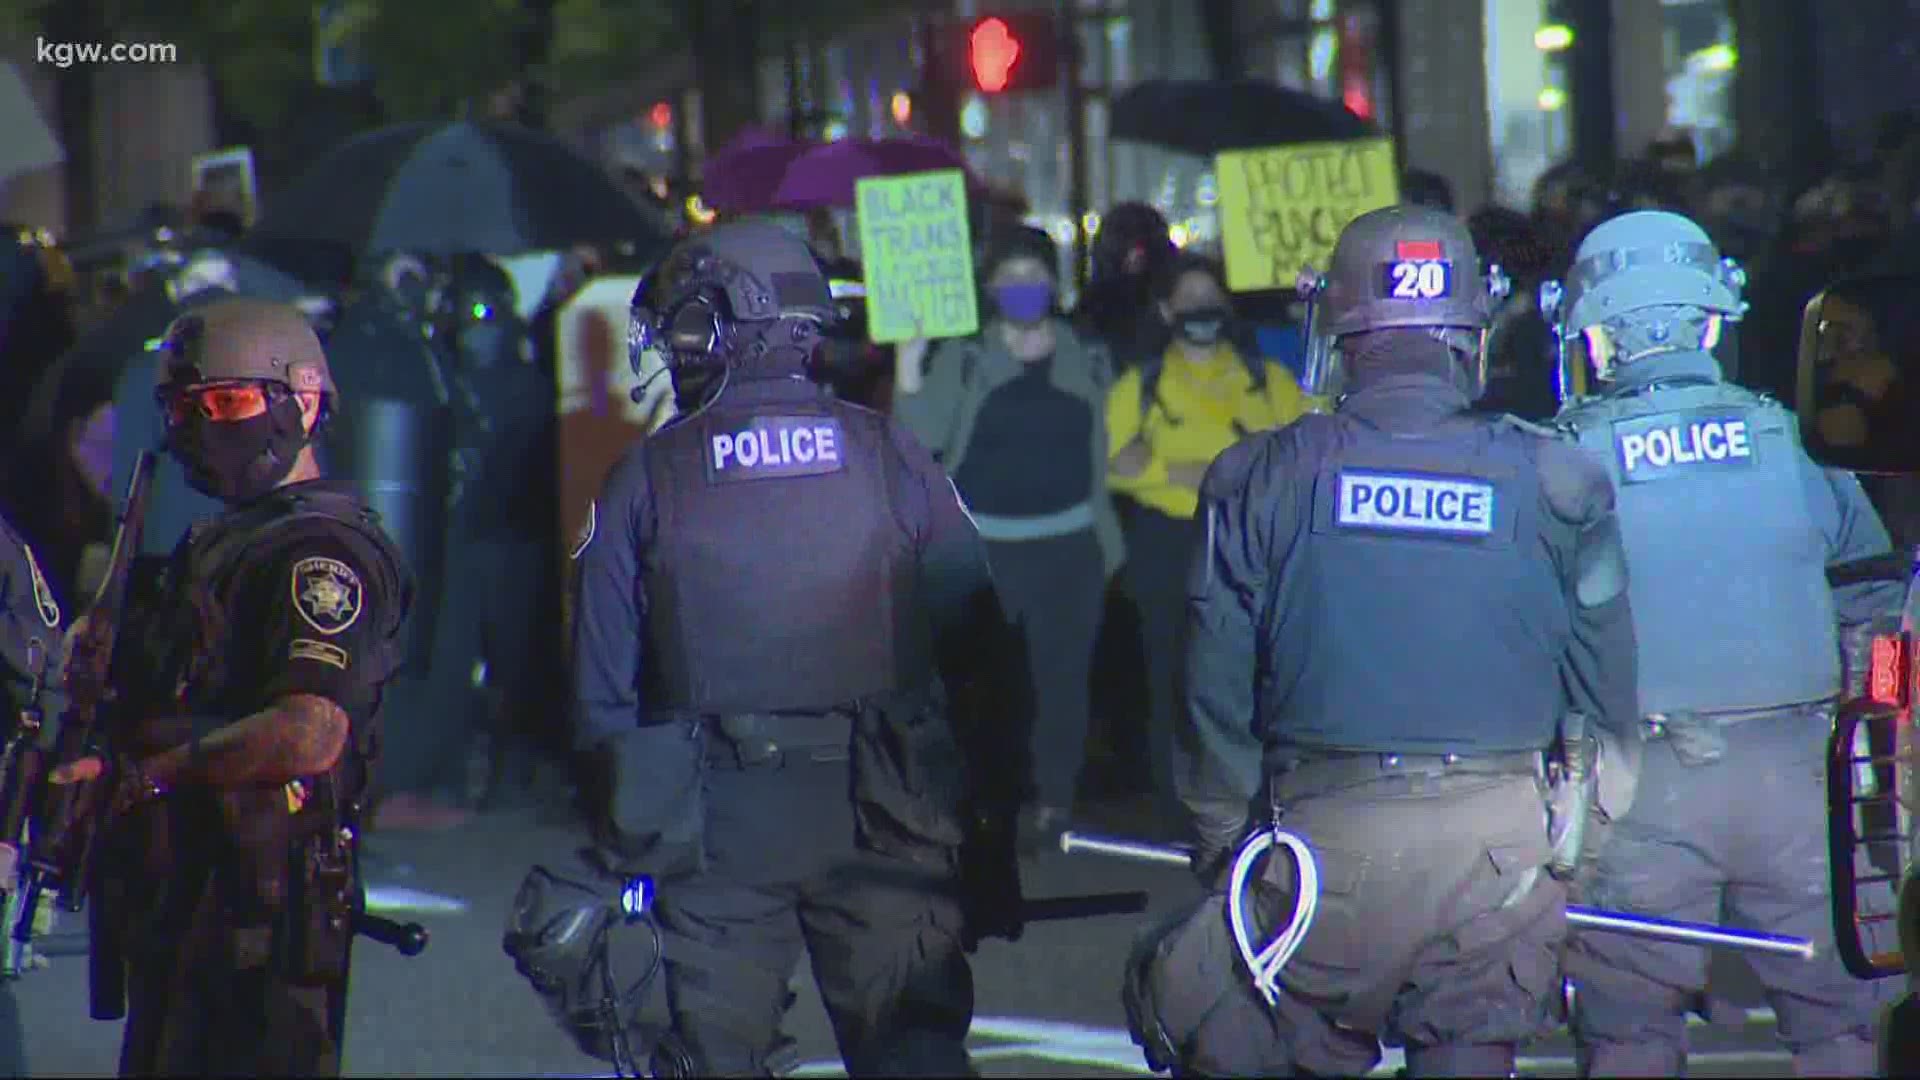 Tuesday night marked the 23rd time Portland police have declared a riot since the protests began in late May.